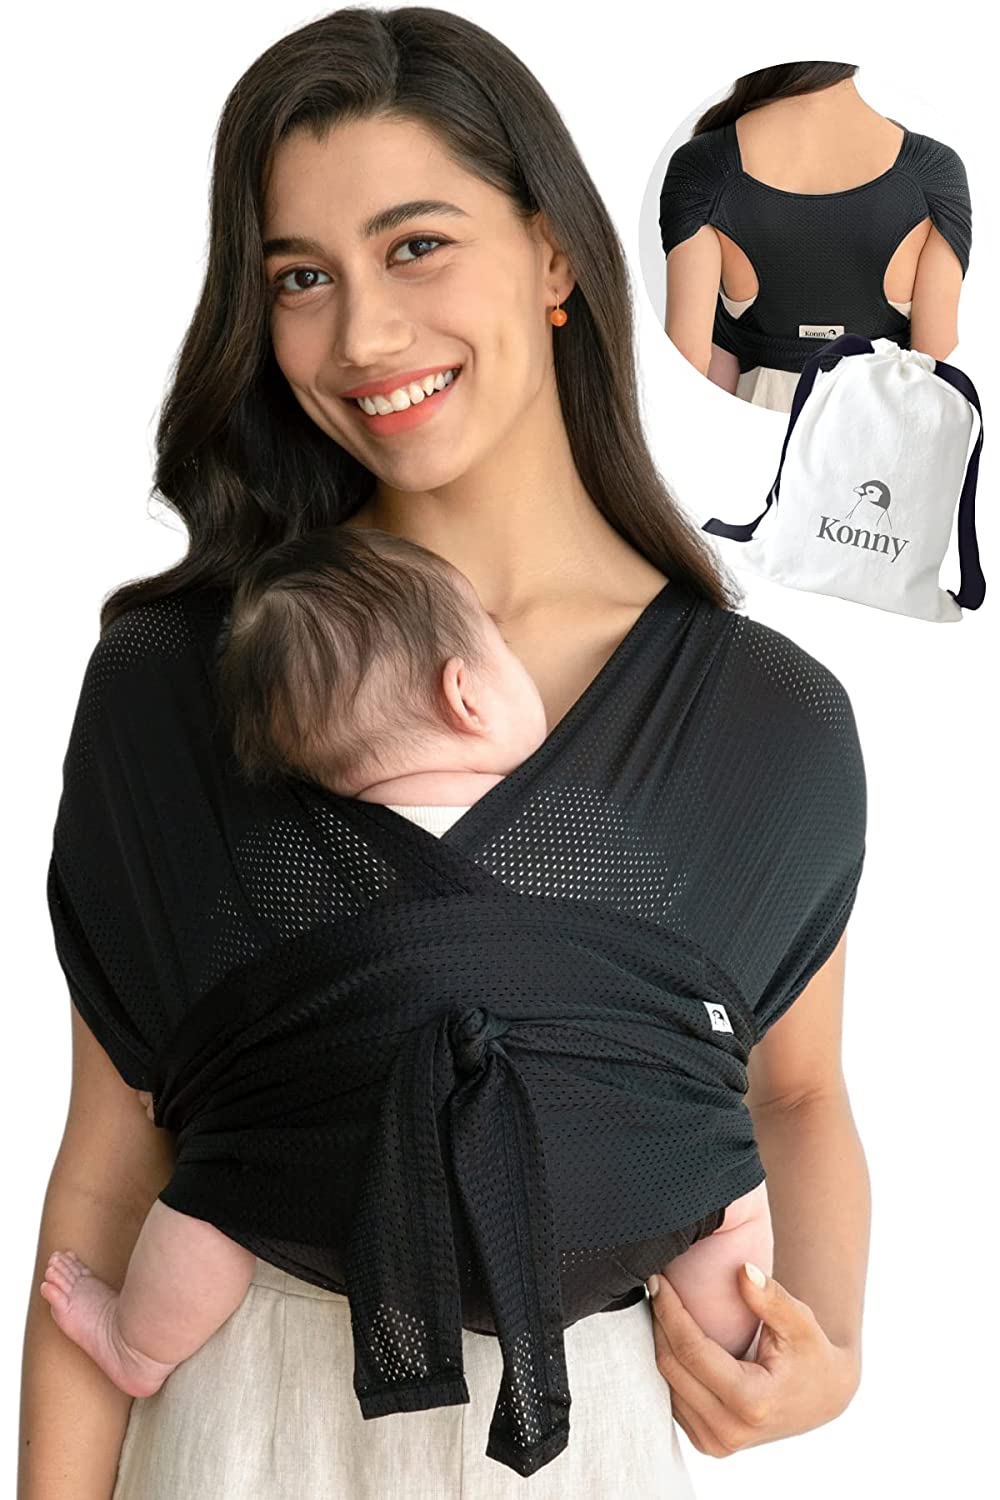 Konny Air Mesh Baby Carrier | Ultra Lightweight, Hassle-Free Baby Wrap | Newborns, Infants up to 20 kg Toddlers | Cool and Breathable Fabric | Useful Sleep Solution (Black, XL)